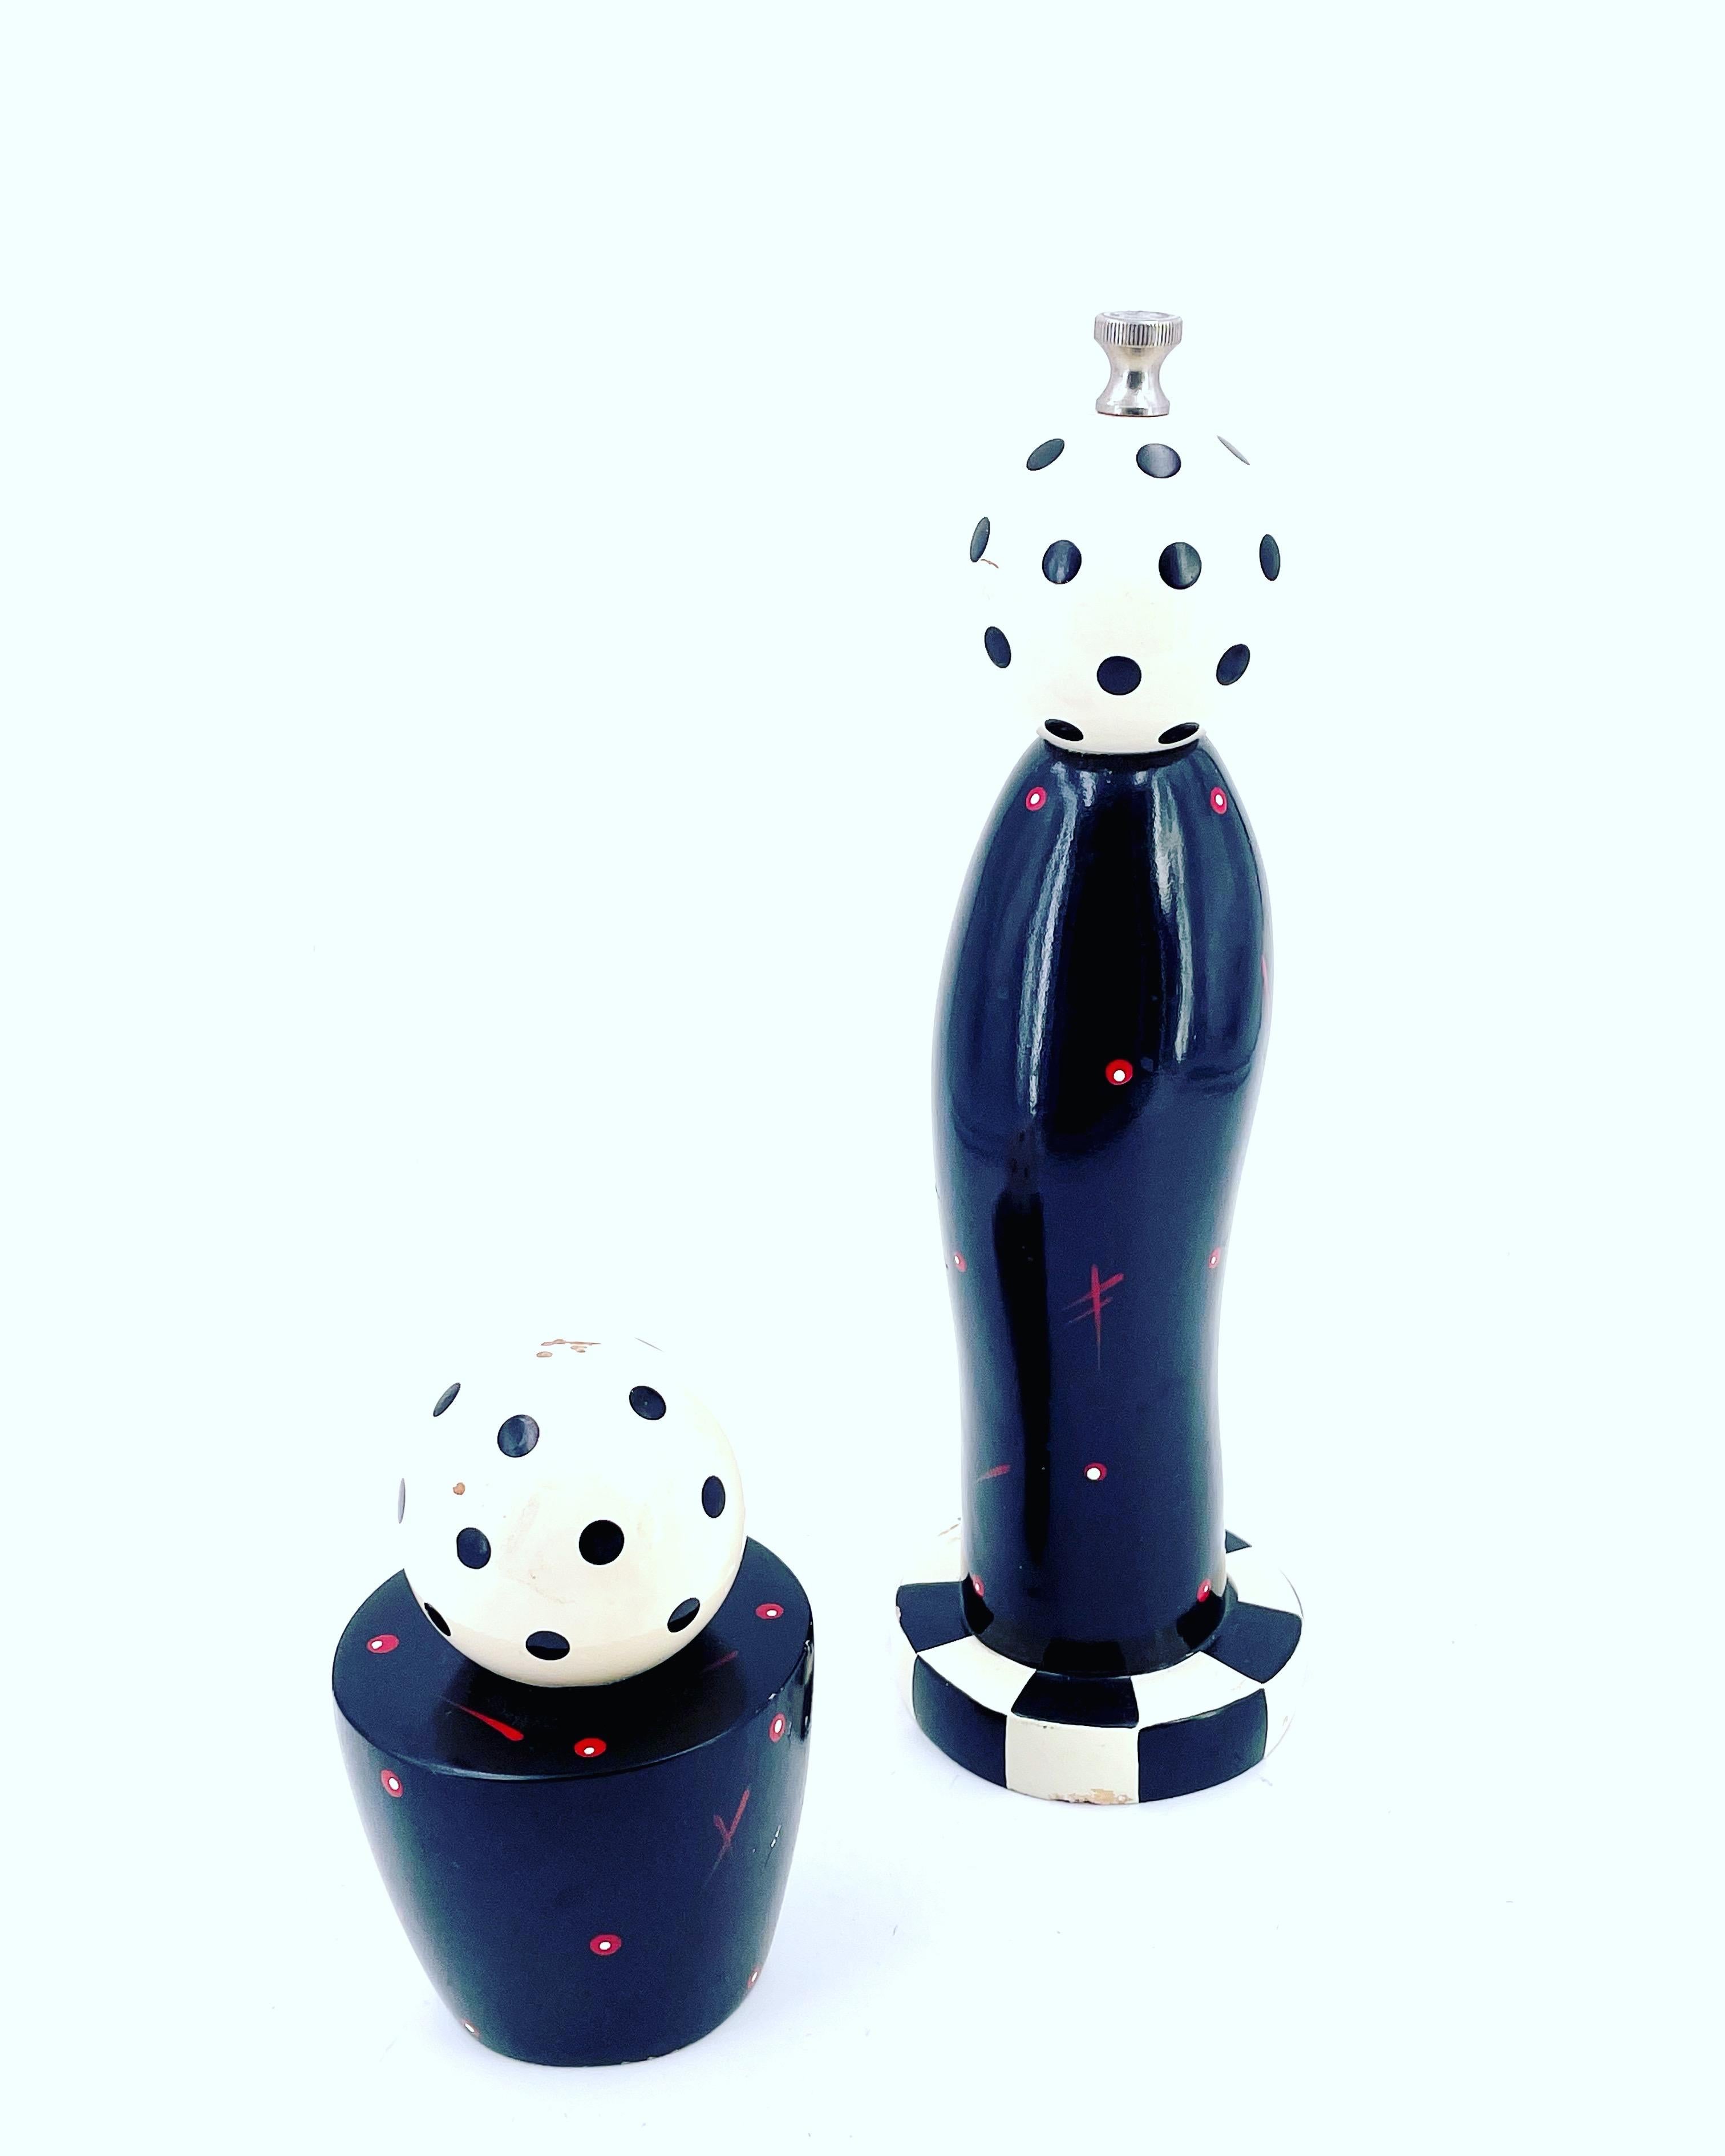 Whimsical salt & Pepper shakers with a flairs of 1980's Memphis era look signed at the bottom.